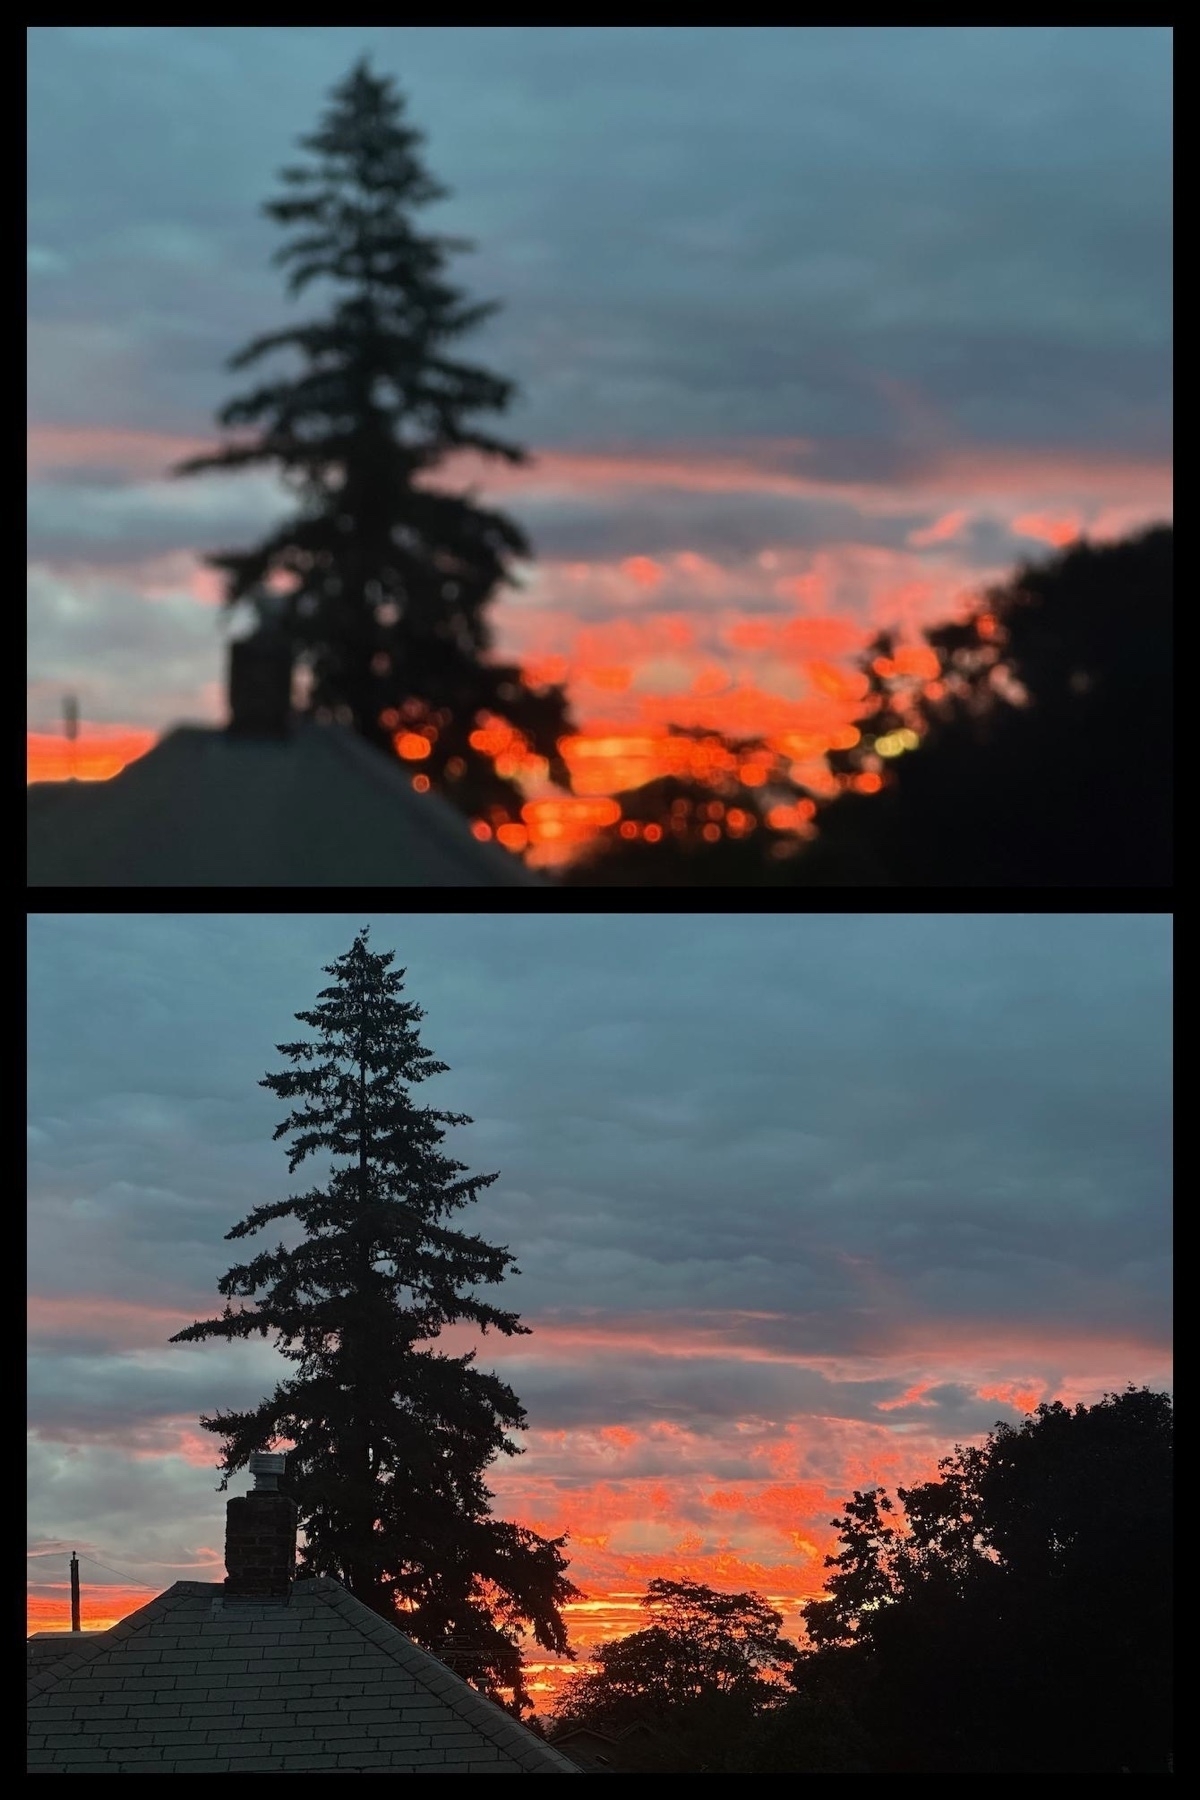 A diptych of photos of a sunrise with lots of shades of red, blue and gray with a silhouette of trees and houses in the foreground. One image is blurry while the other is sharp.